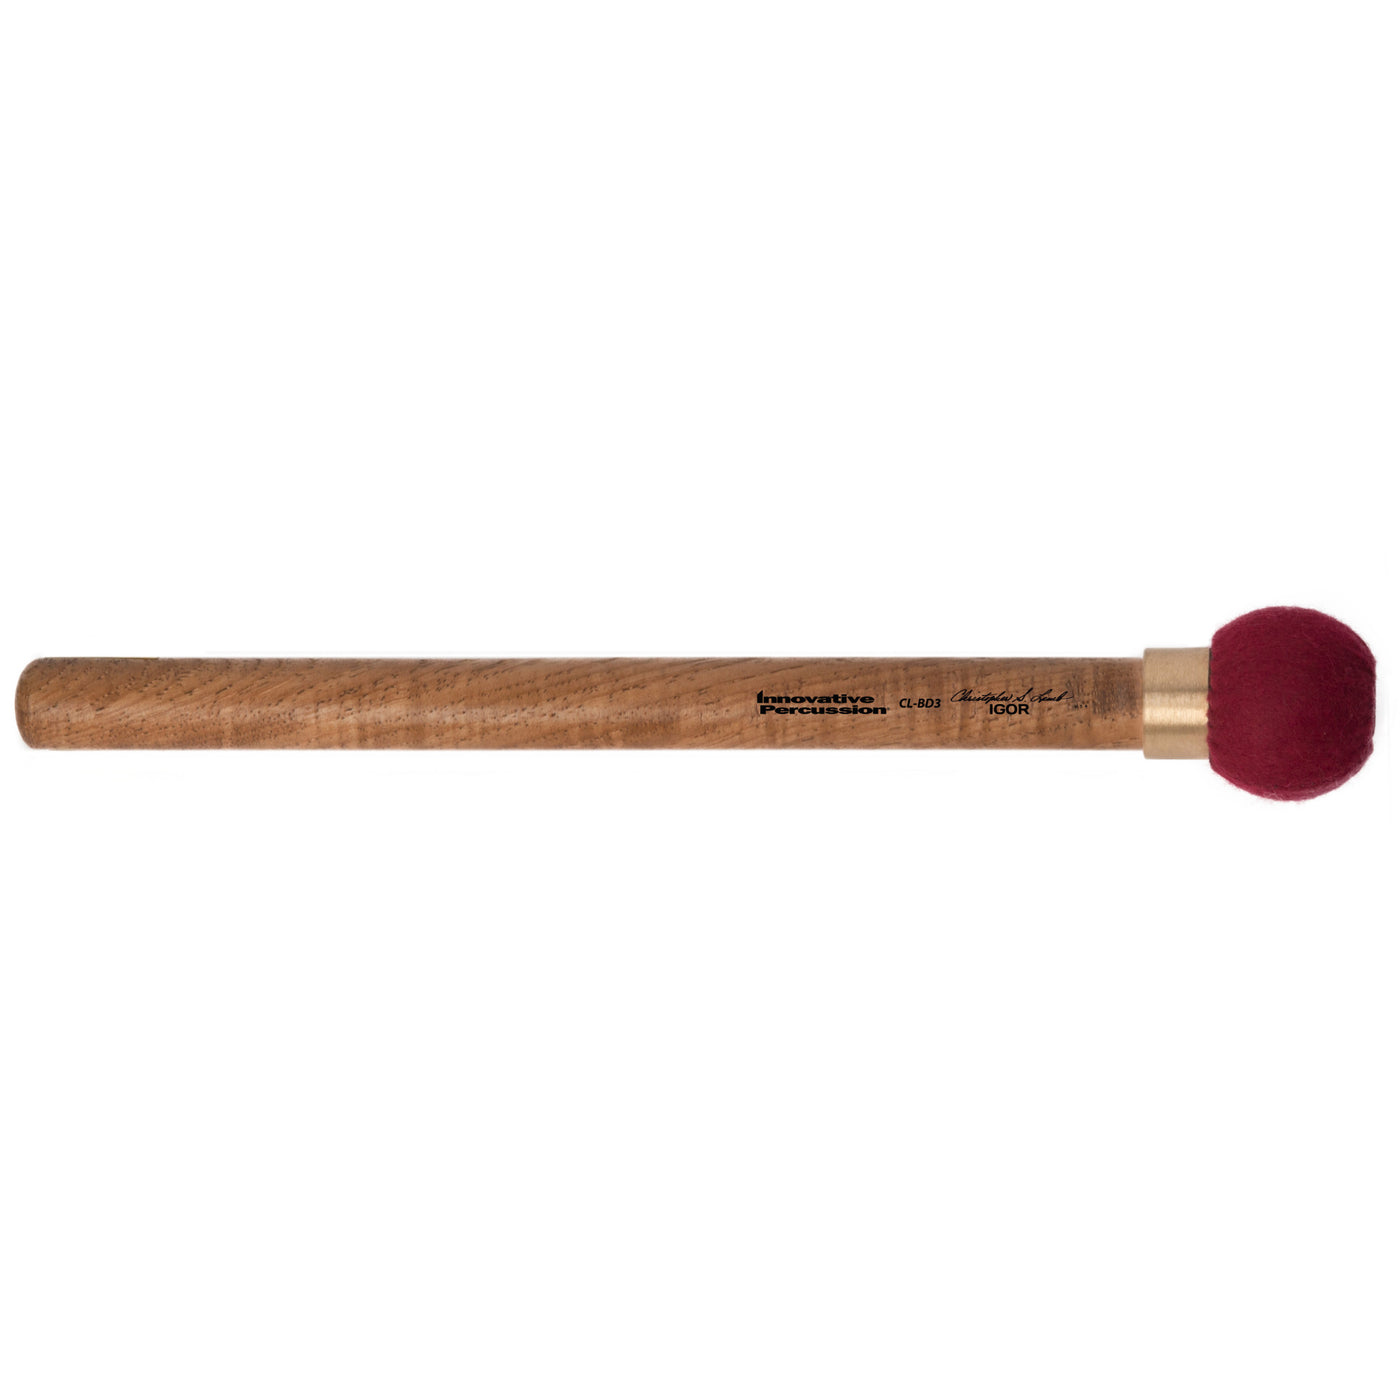 Innovative Percussion CL-BD3 Drum Mallet